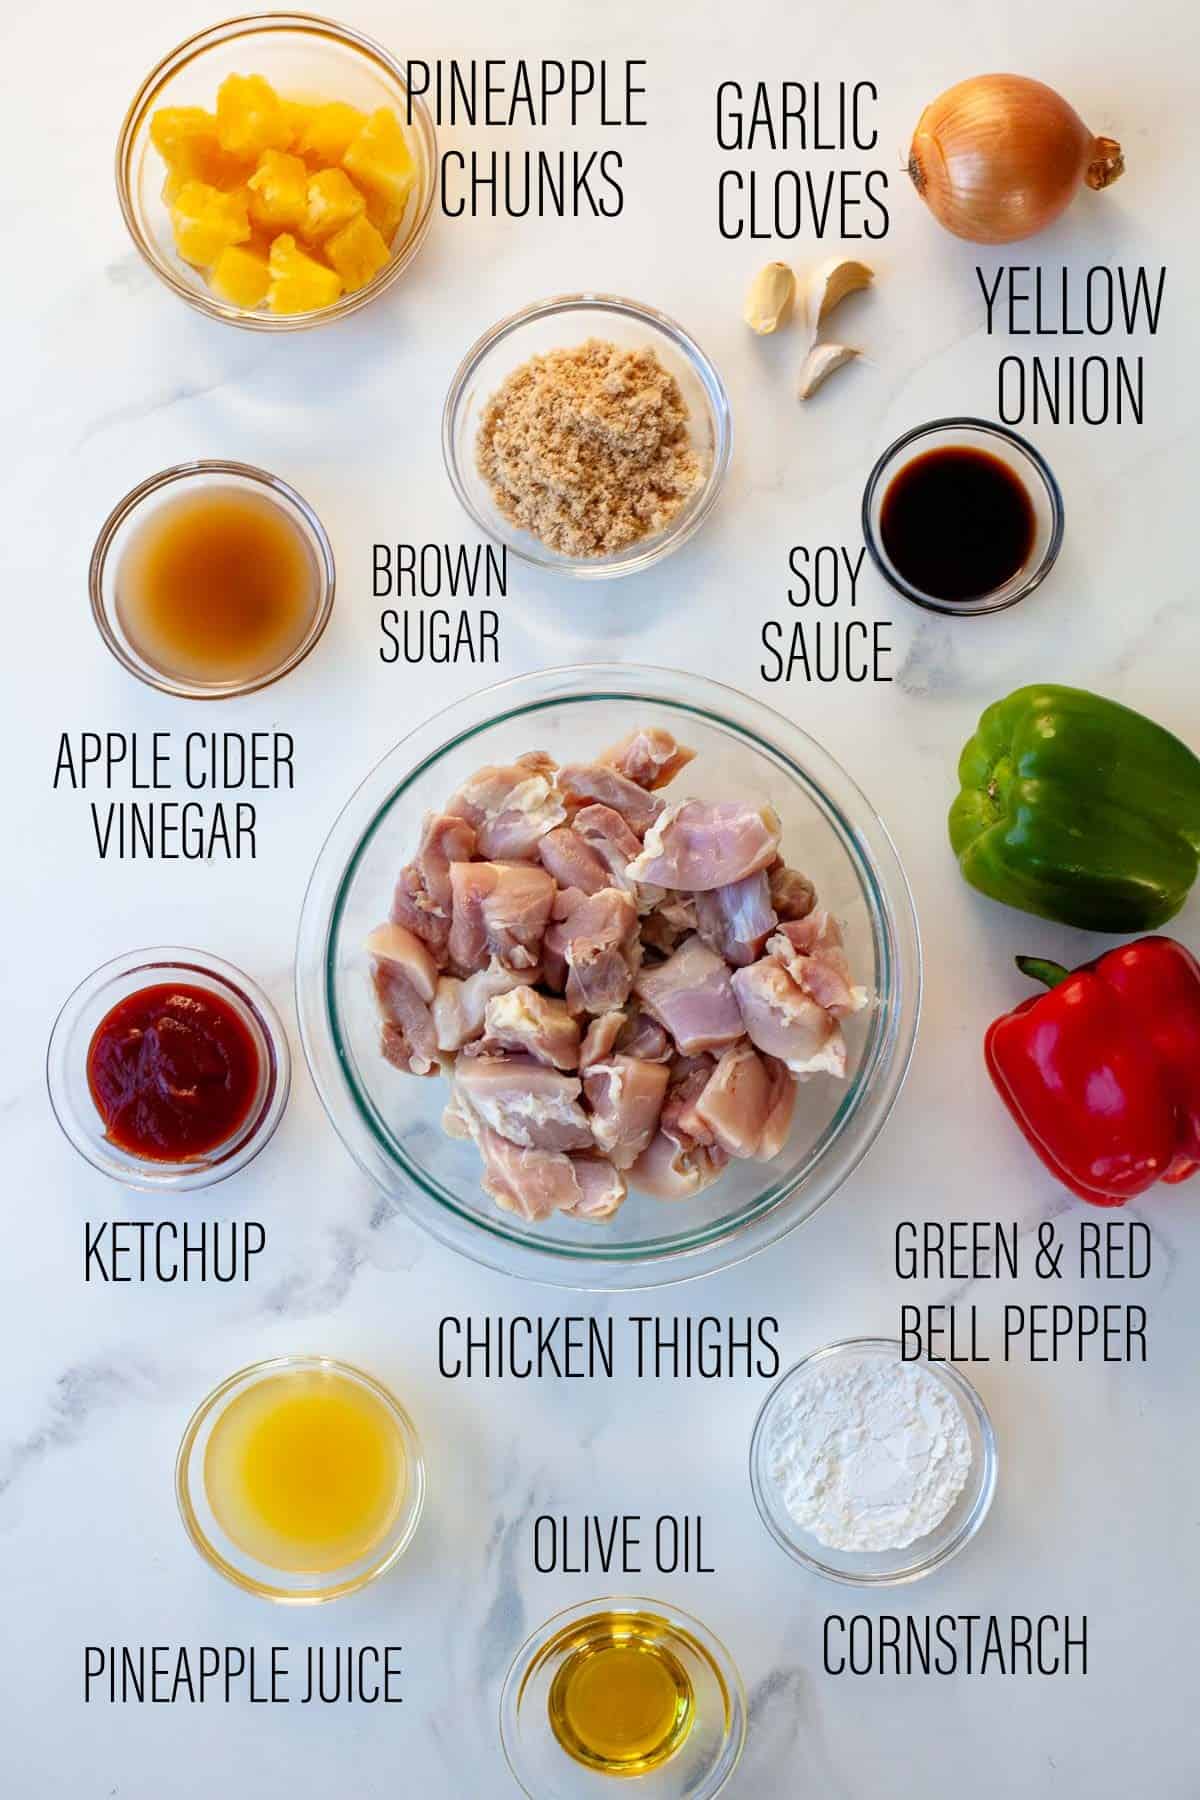 Instant pot sweet and sour chicken ingredients shown. Chicken thighs in the center surrounded by other ingredients in small bowls. Pineapple chunks, garlic cloves, yellow onion, soy sauce, brown sugar, apple cider vinegar, ketchup, green and red bell pepper, olive oil, pineapple juice, cornstarch